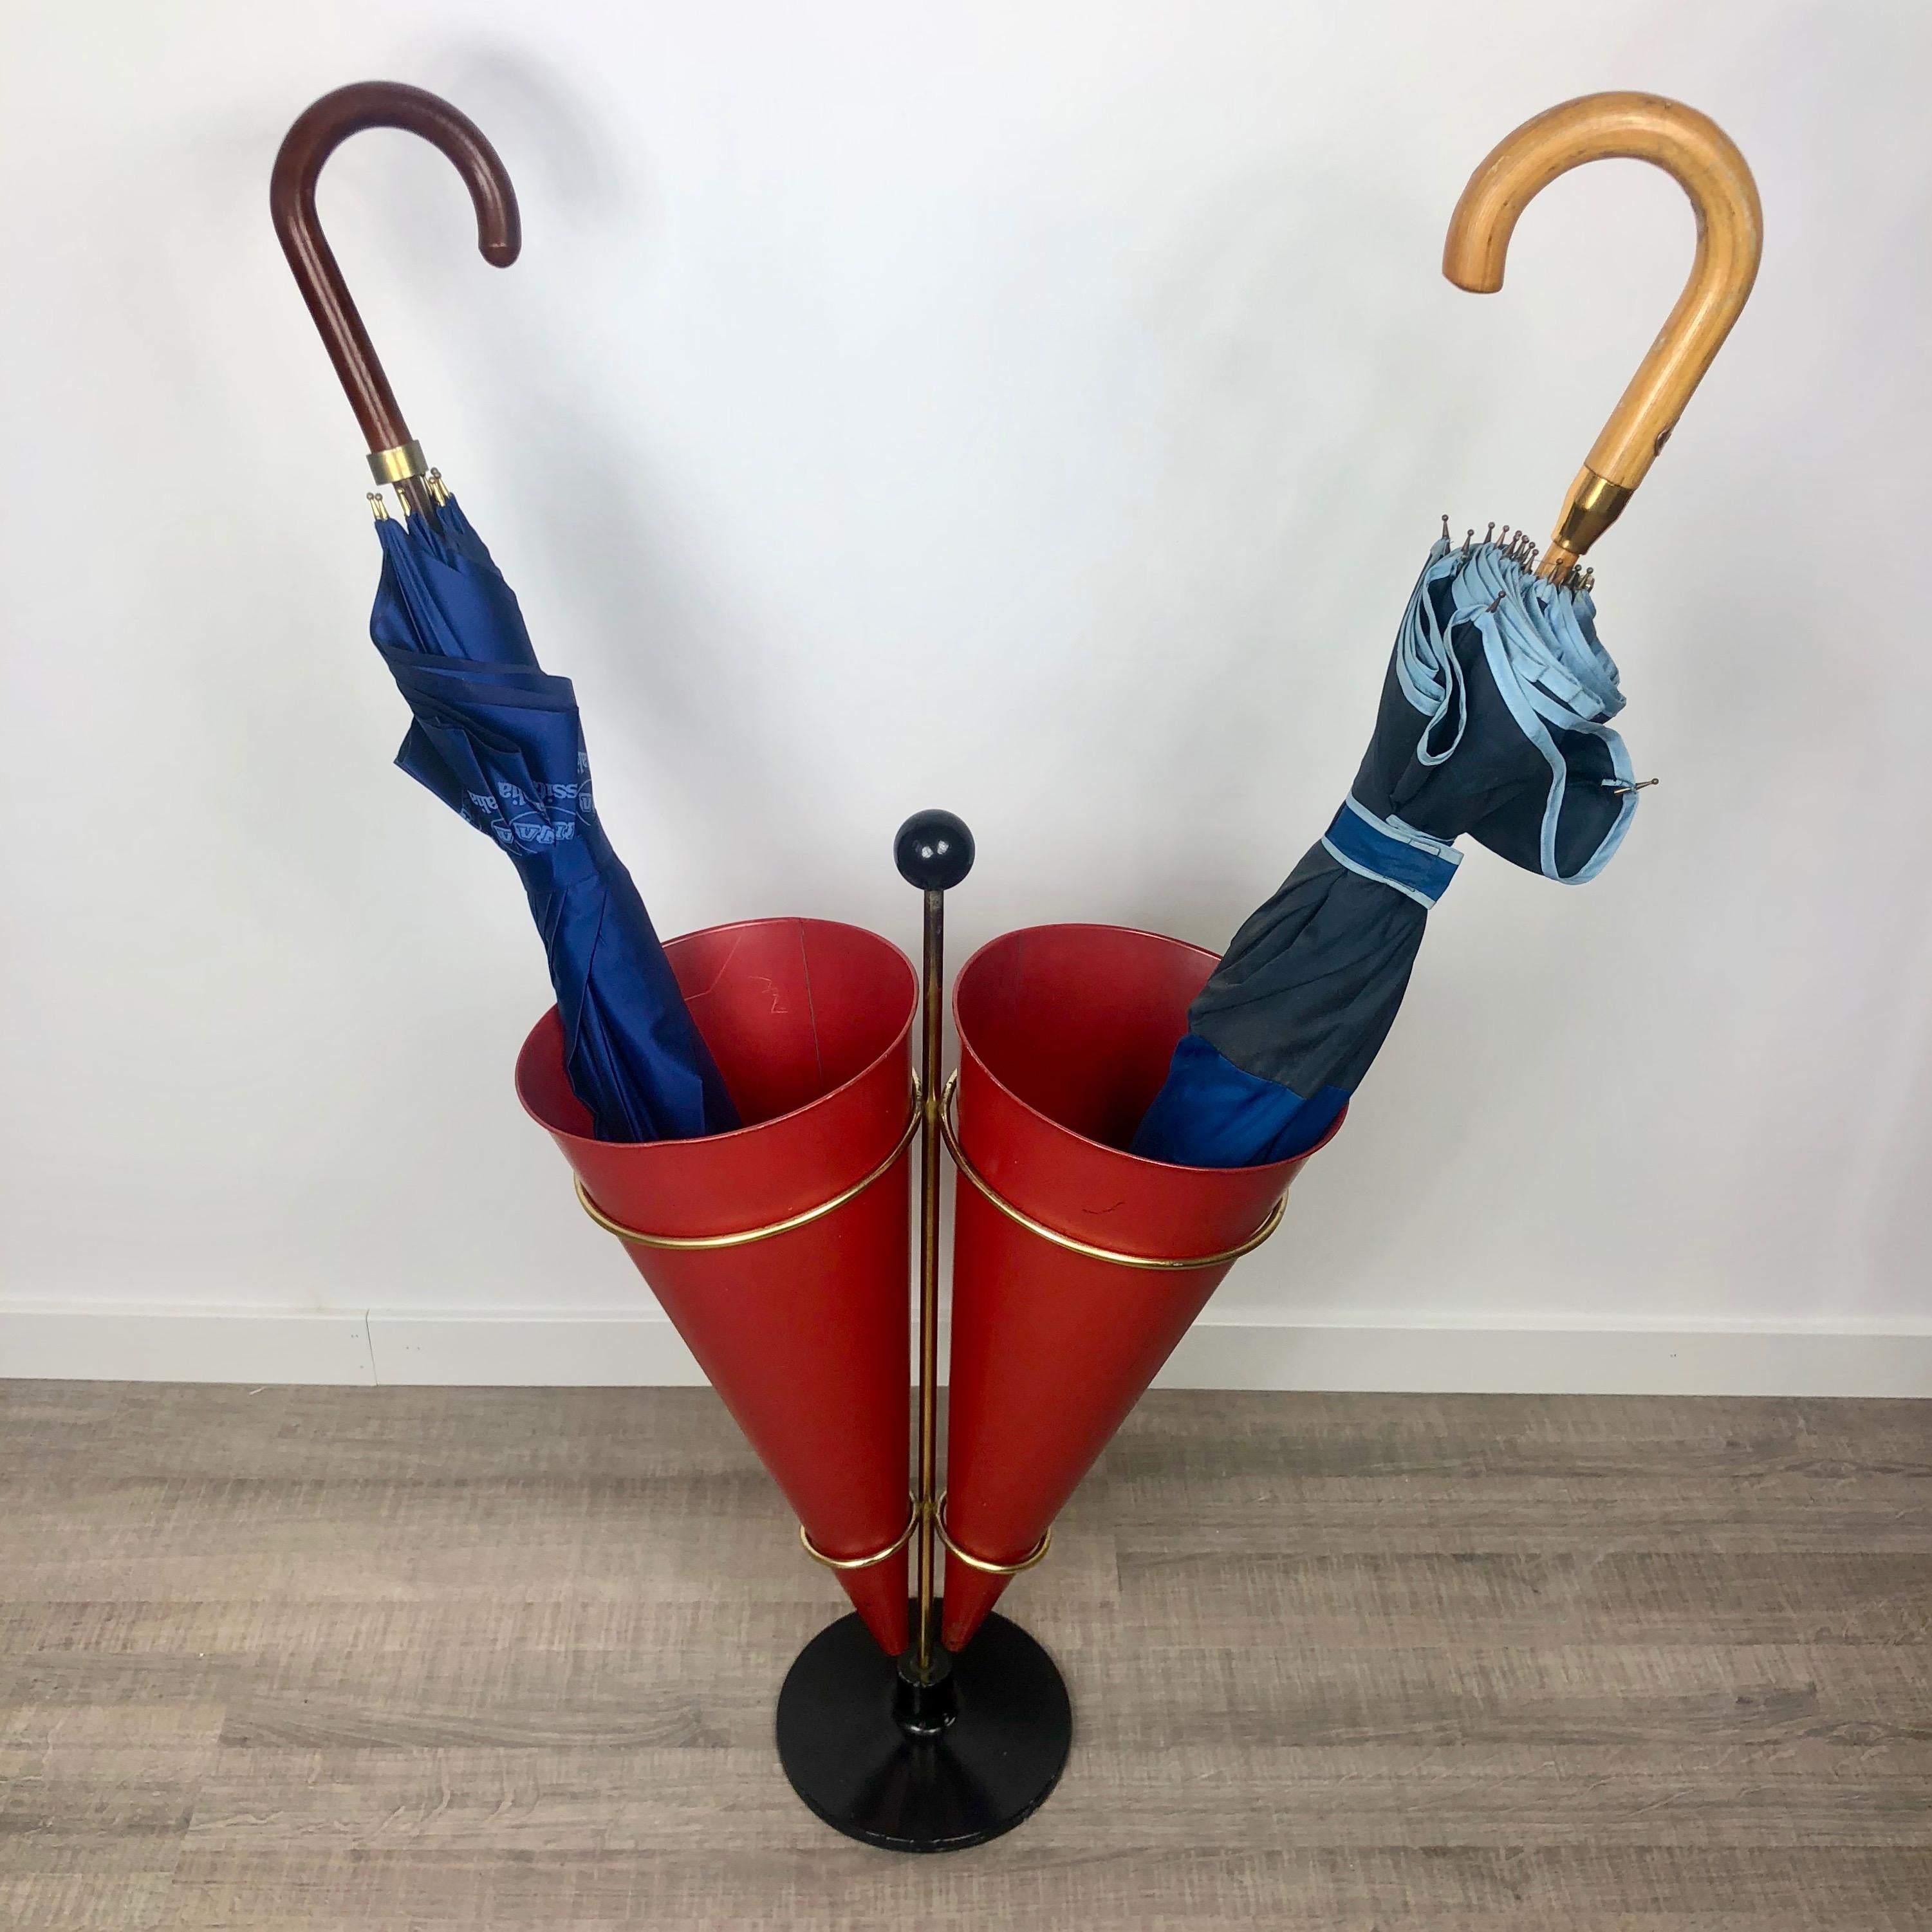 Umbrella stand in a metal and brass structure featuring two red cones as rackets. Made by Vitra (the original stamp is clearly visibile) – Italy, circa 1970.
Conditions are good and all the signs of time the item presents are shown in the photos.